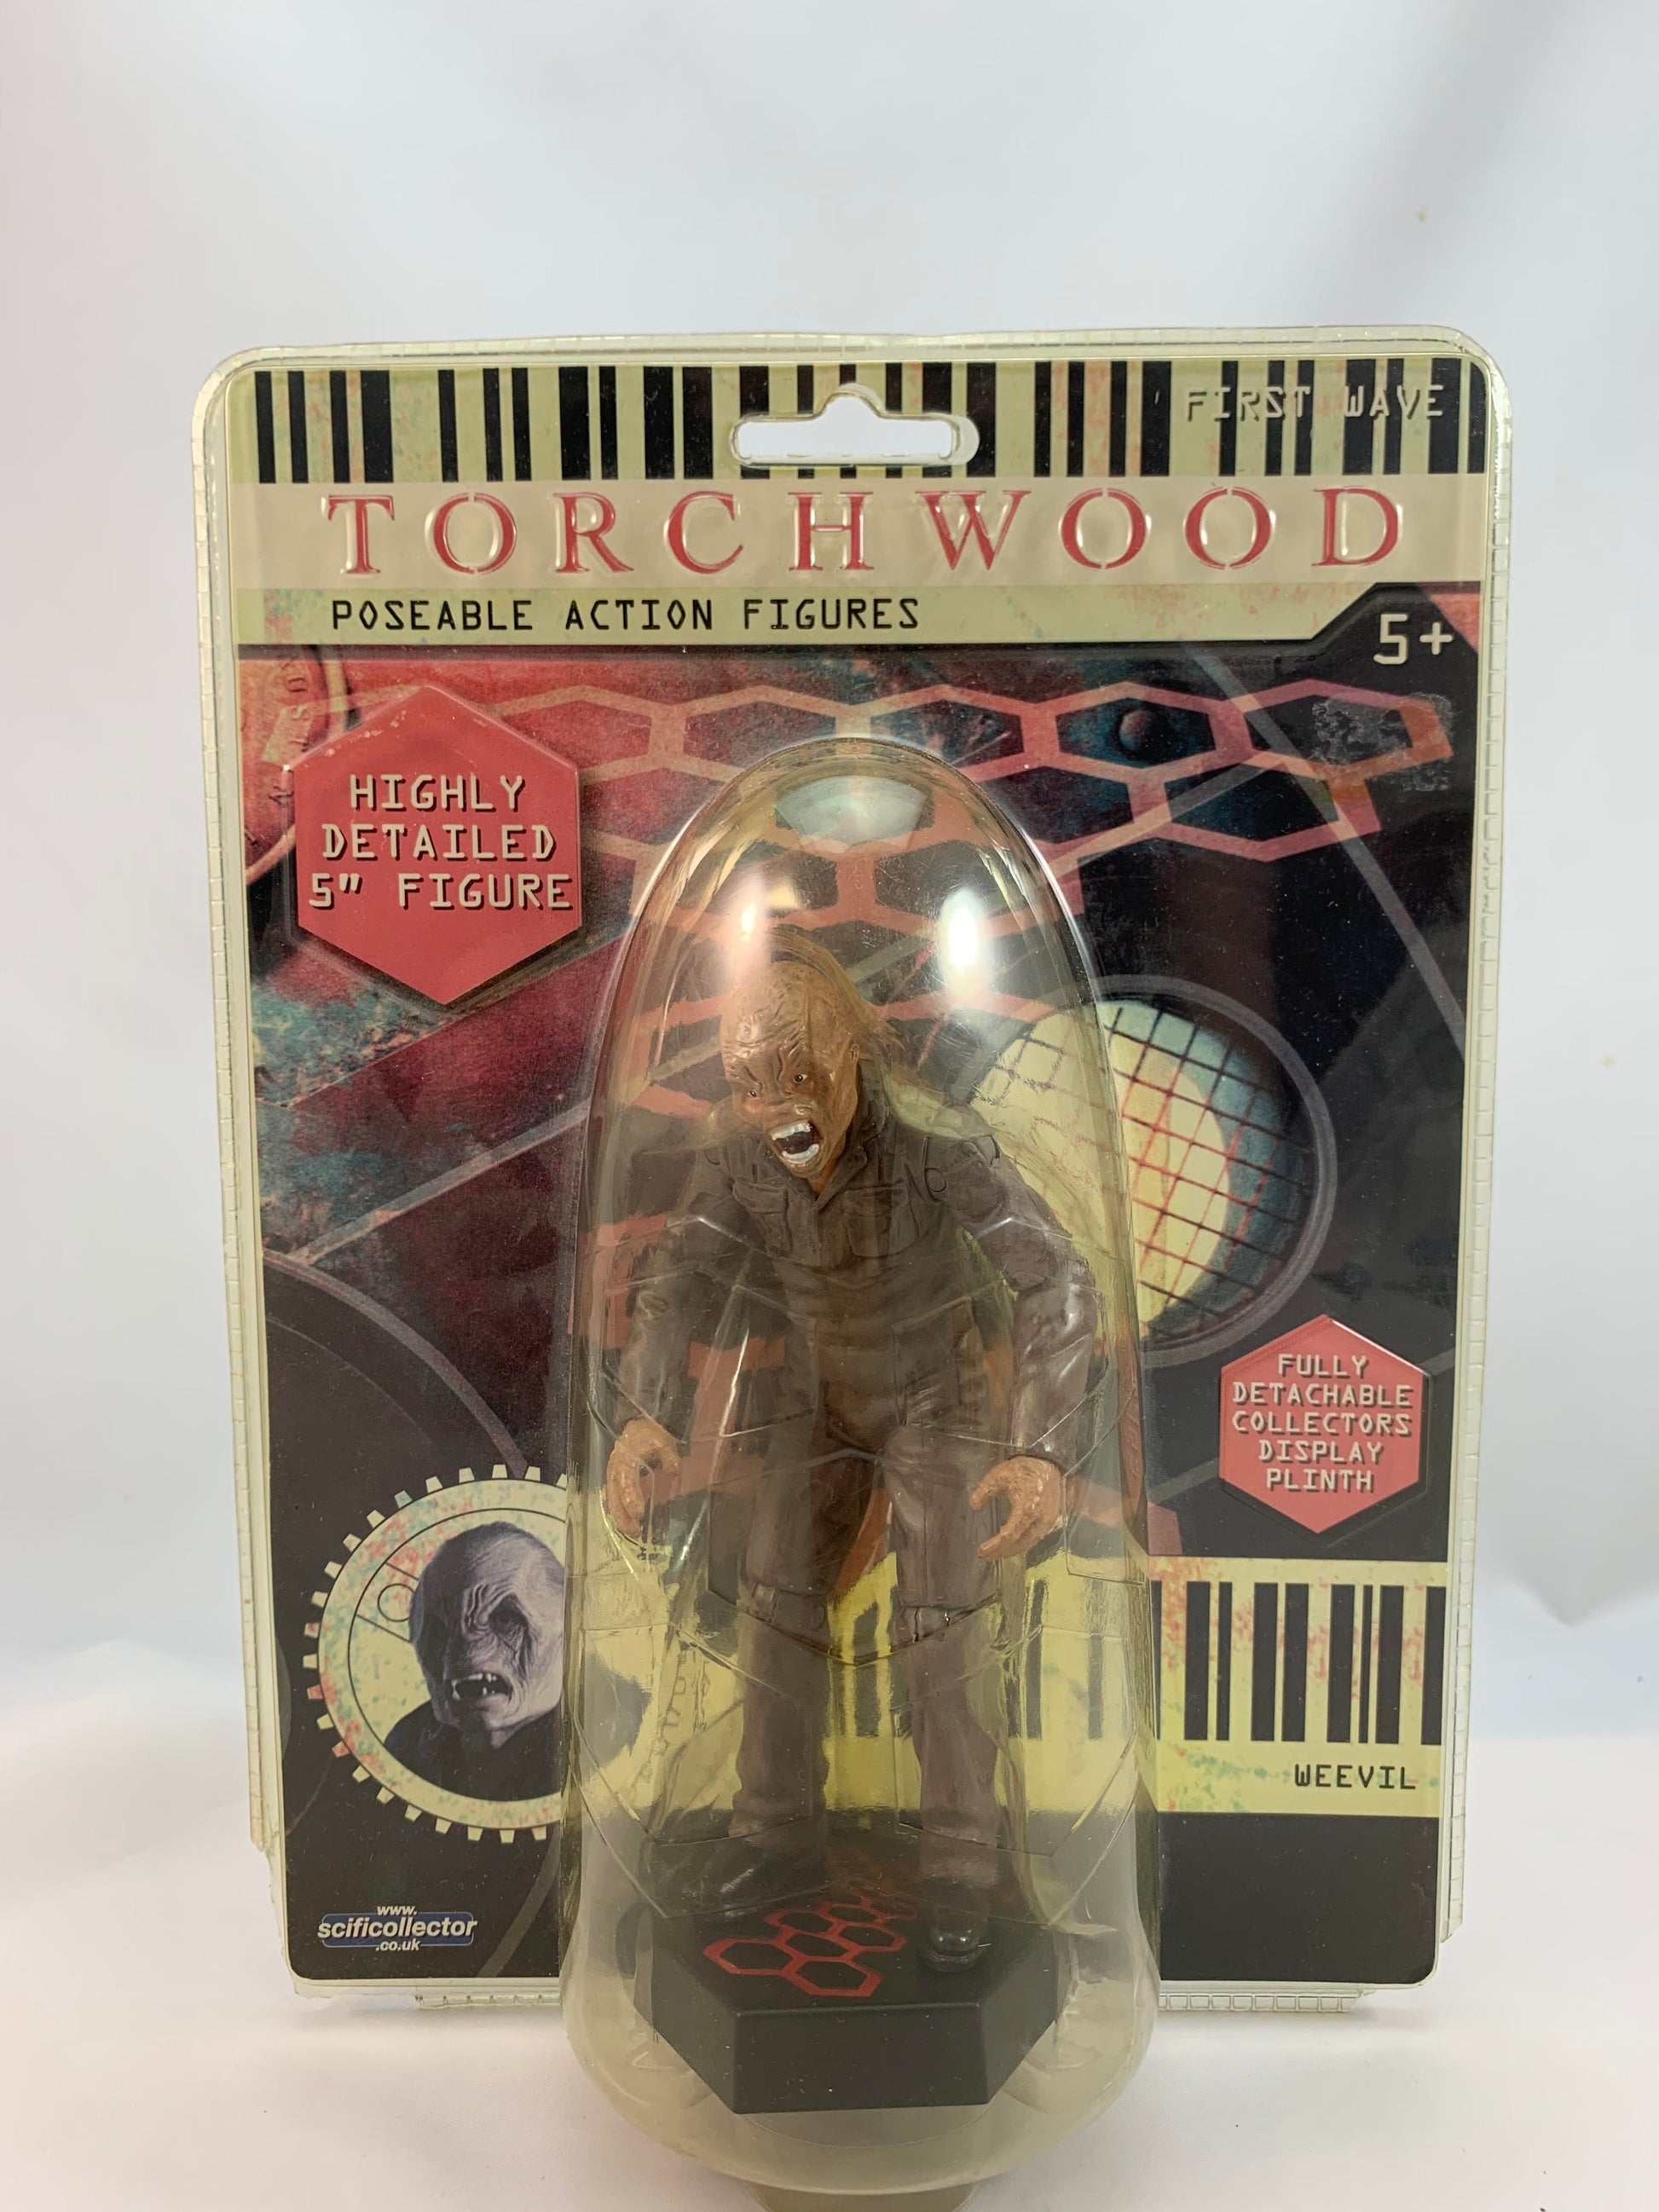 2011 Sci Fi Cllector Torchwood Series 1 Weevil MOC - Action Figure